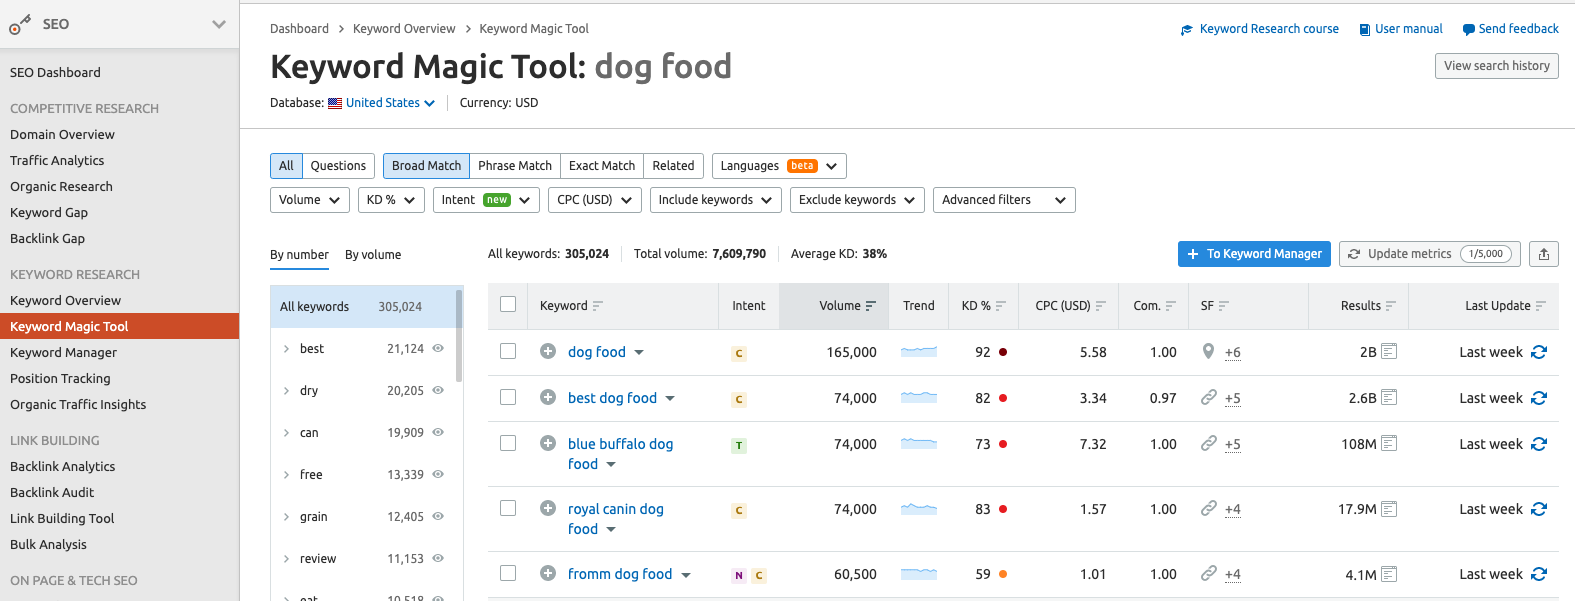 screenshot of search results for dog food in the keyword magic tool